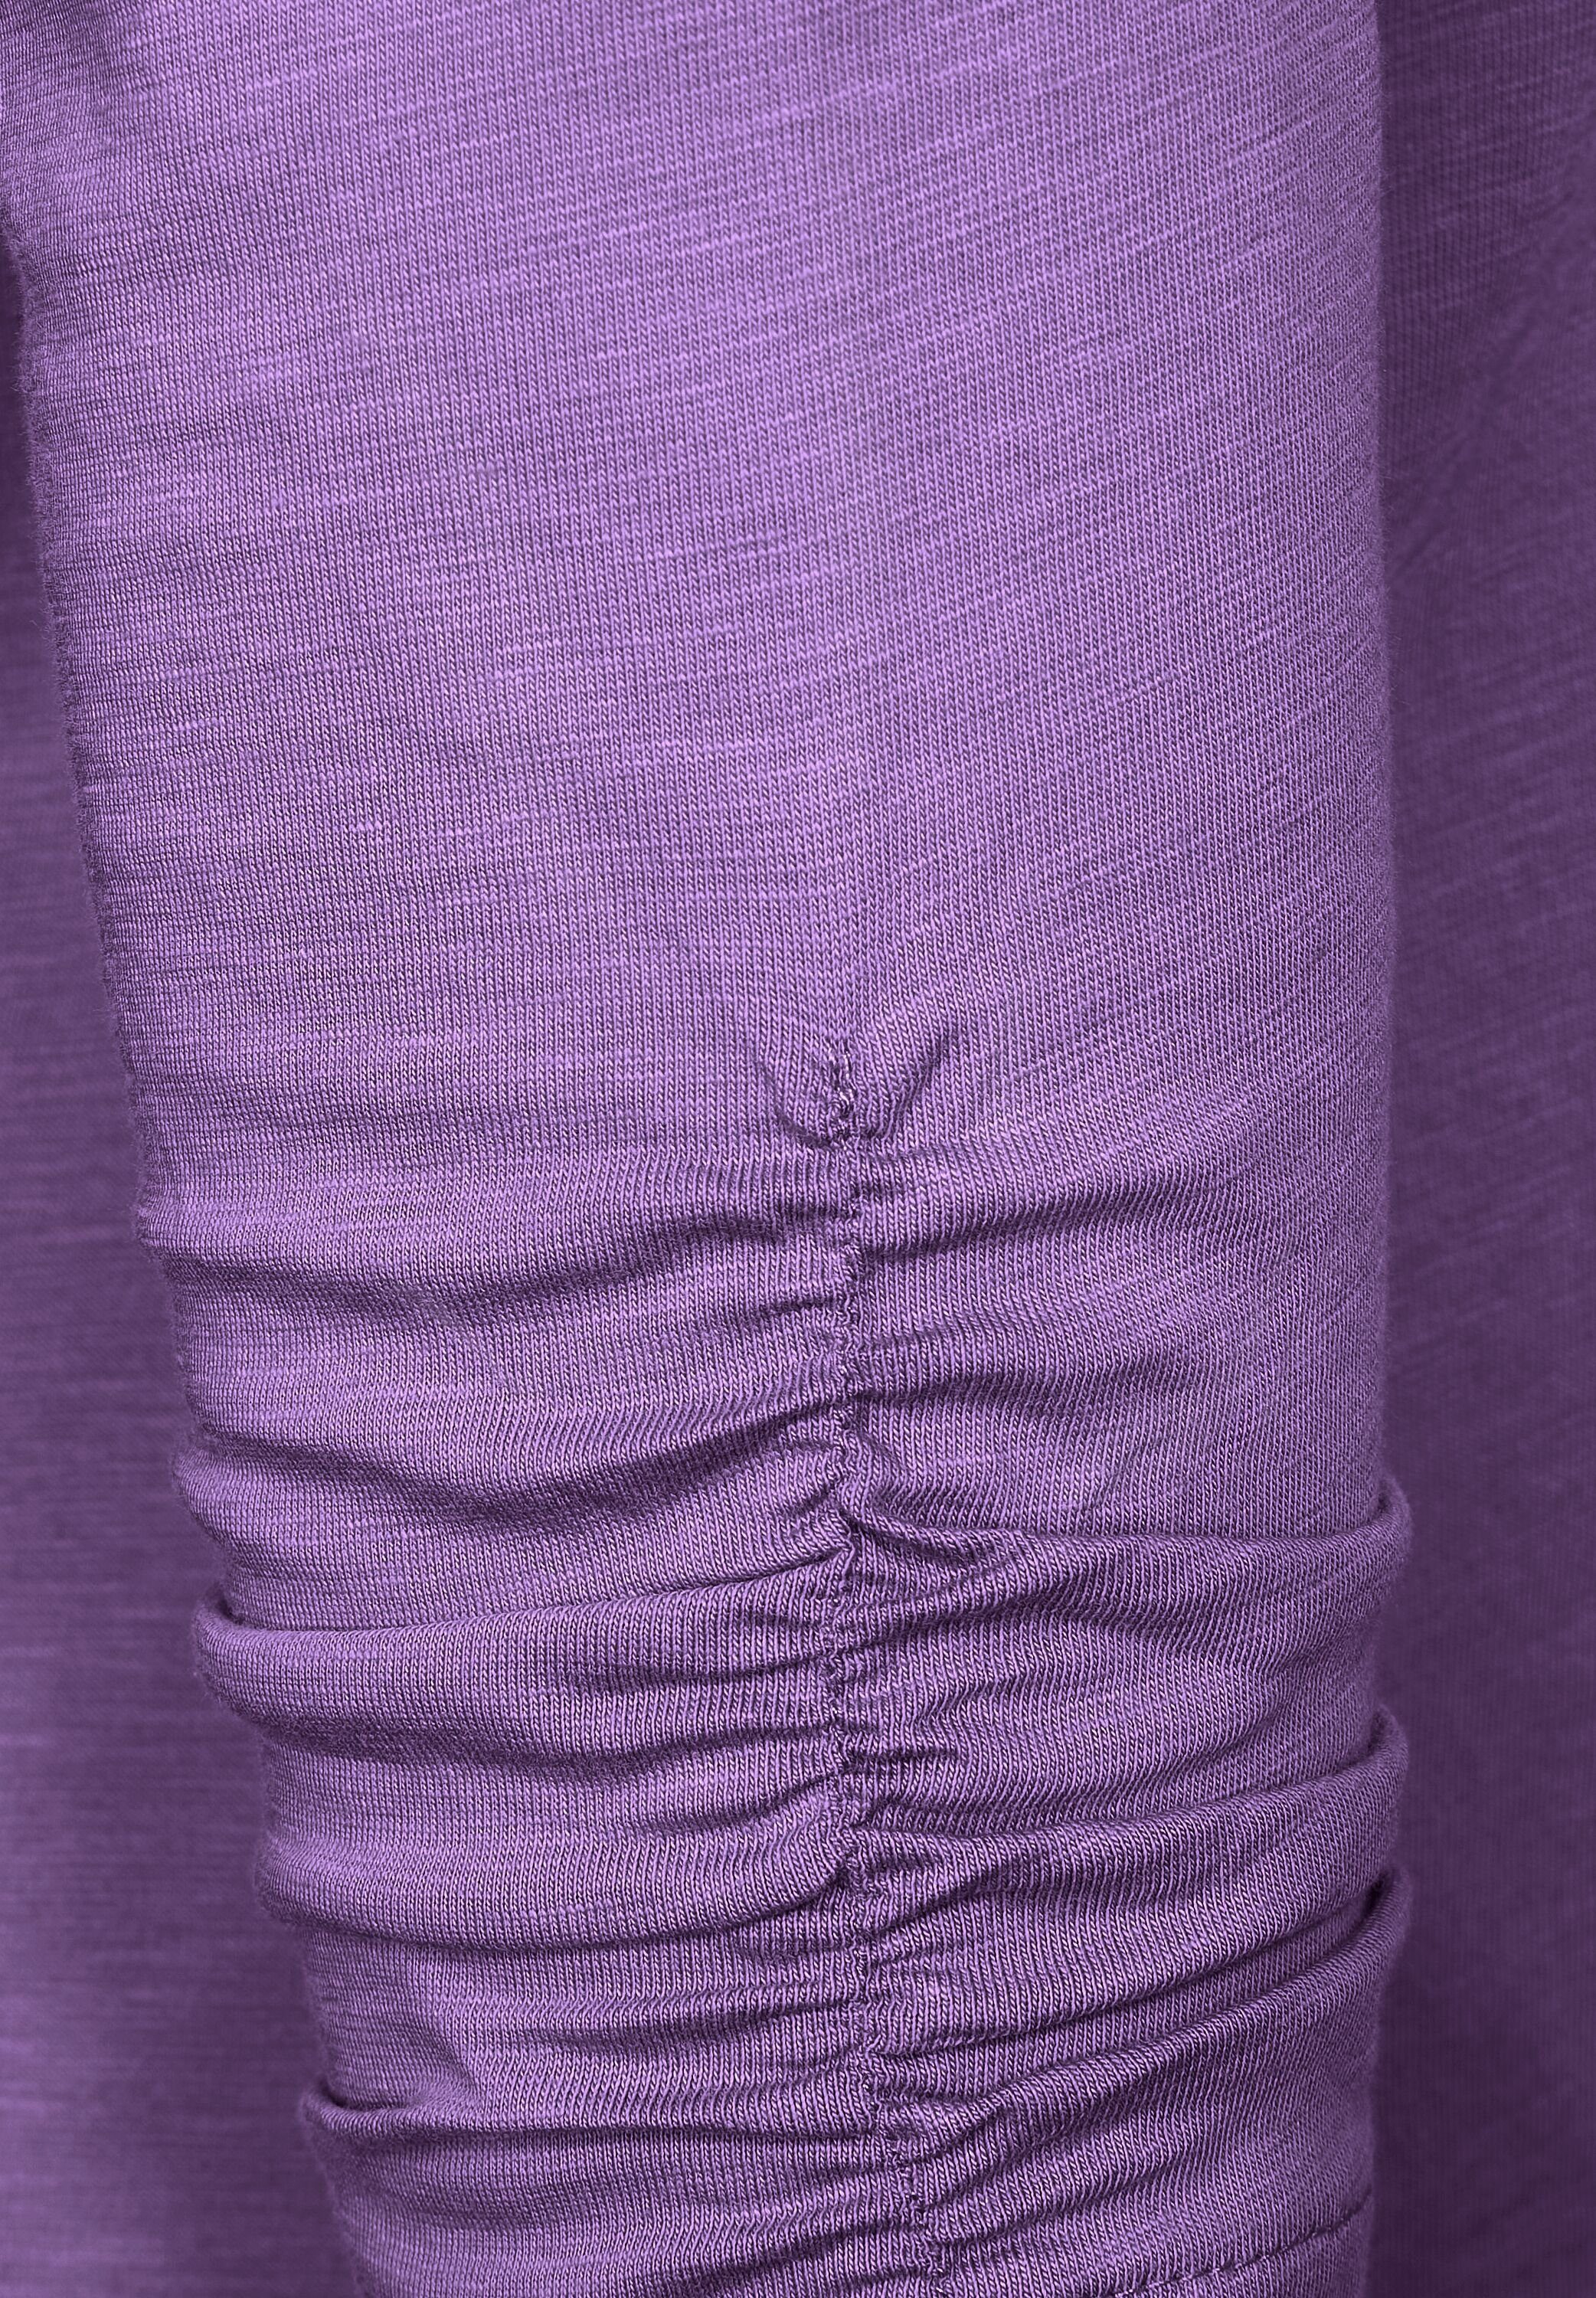 STREET ONE 3/4-Arm-Shirt in lupine Unifarbe lilac